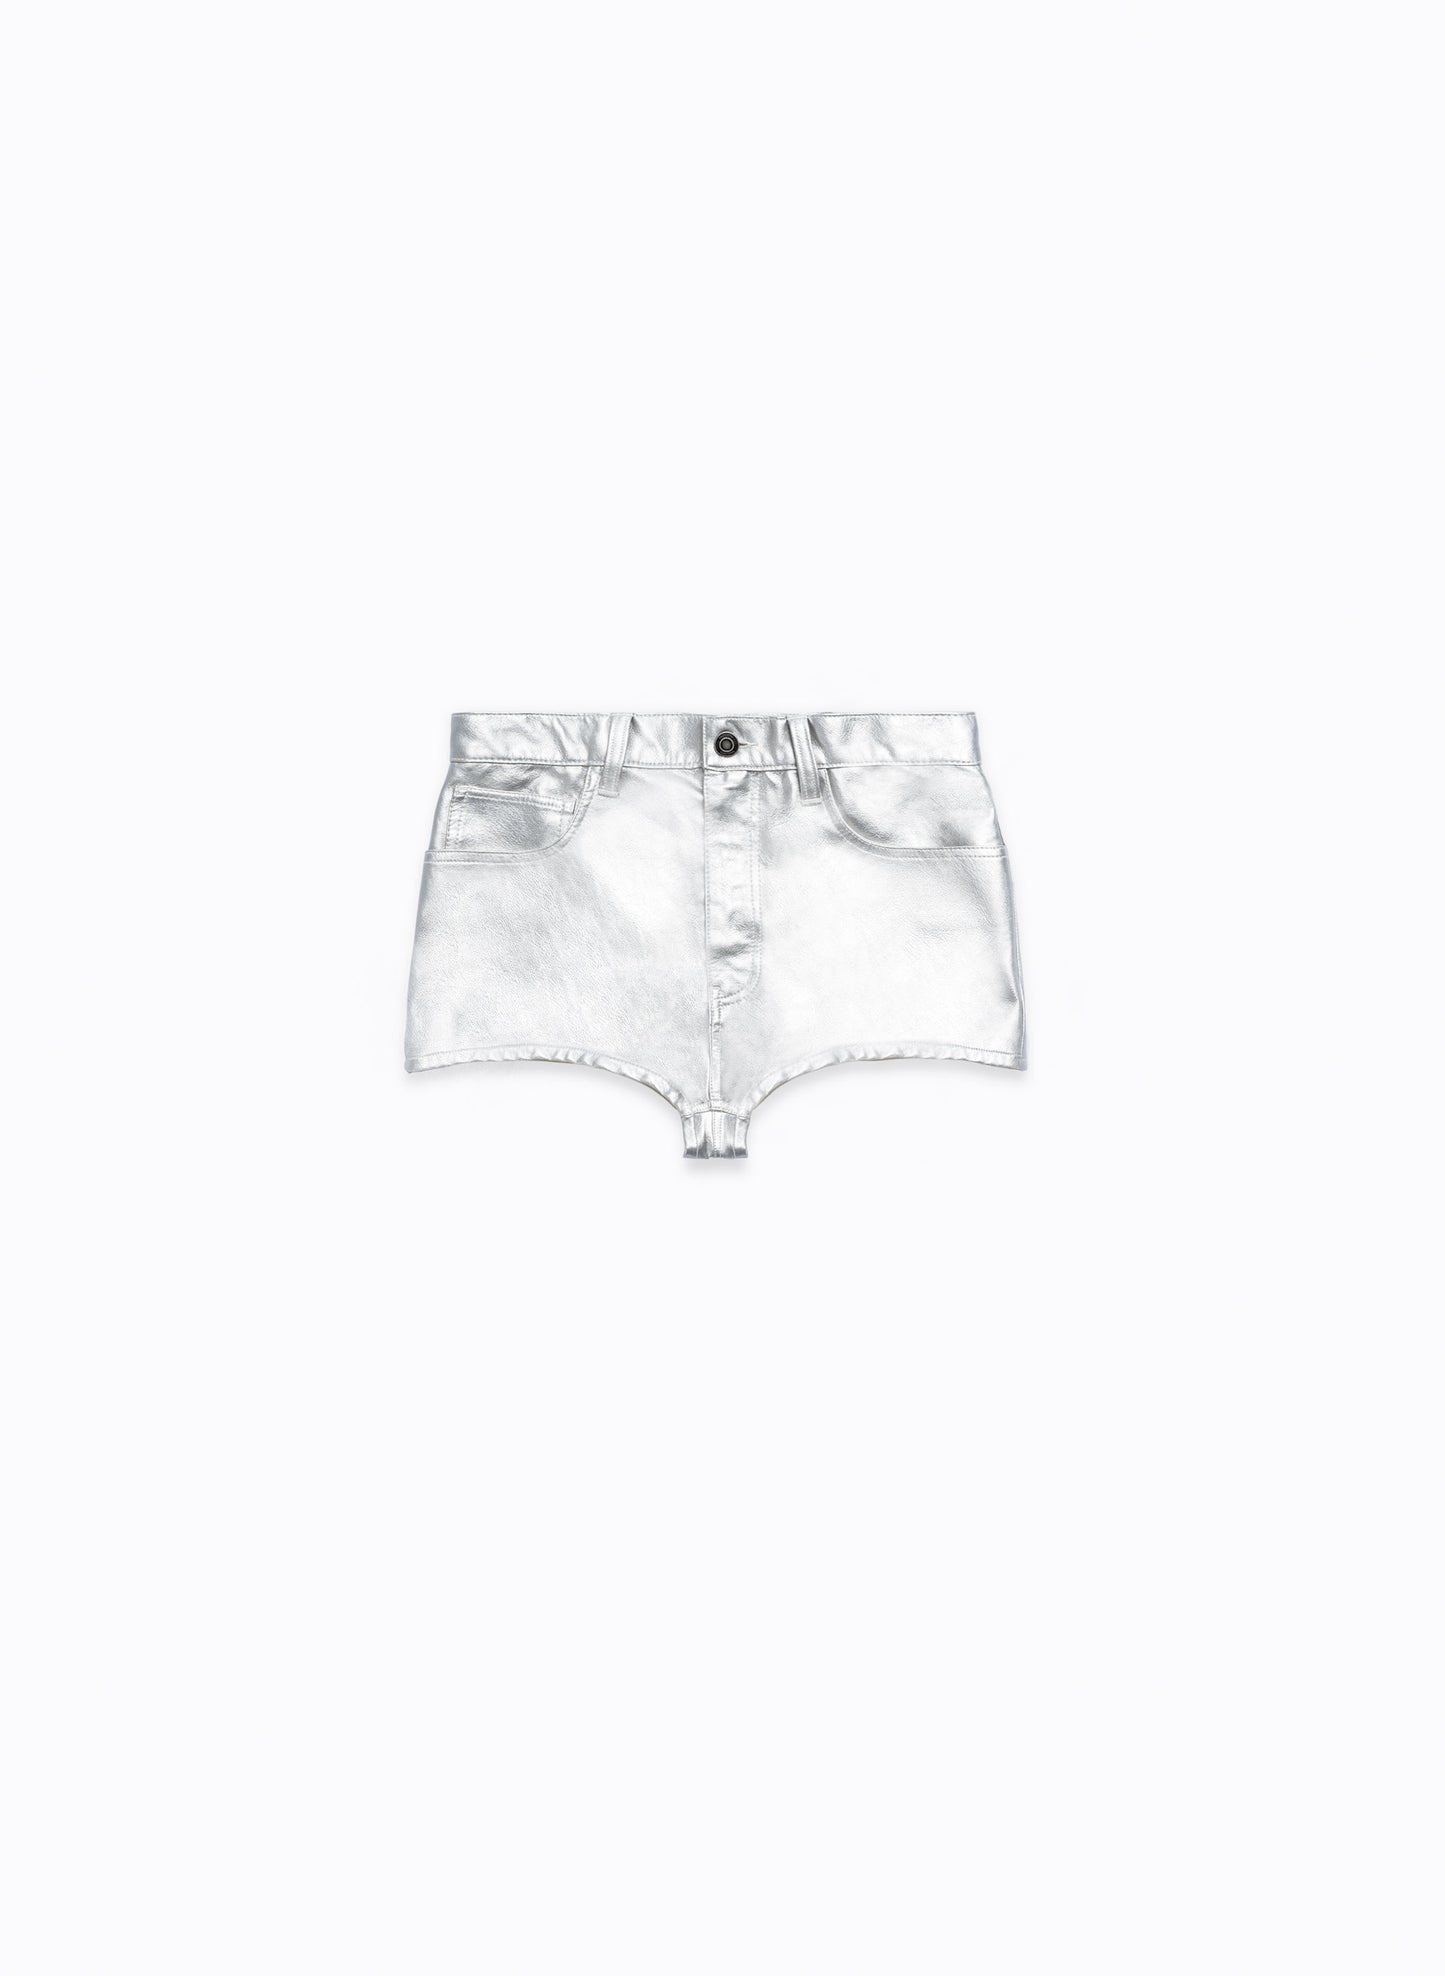 TAGLIONI Patent Leather Fitted Shorts in Silver